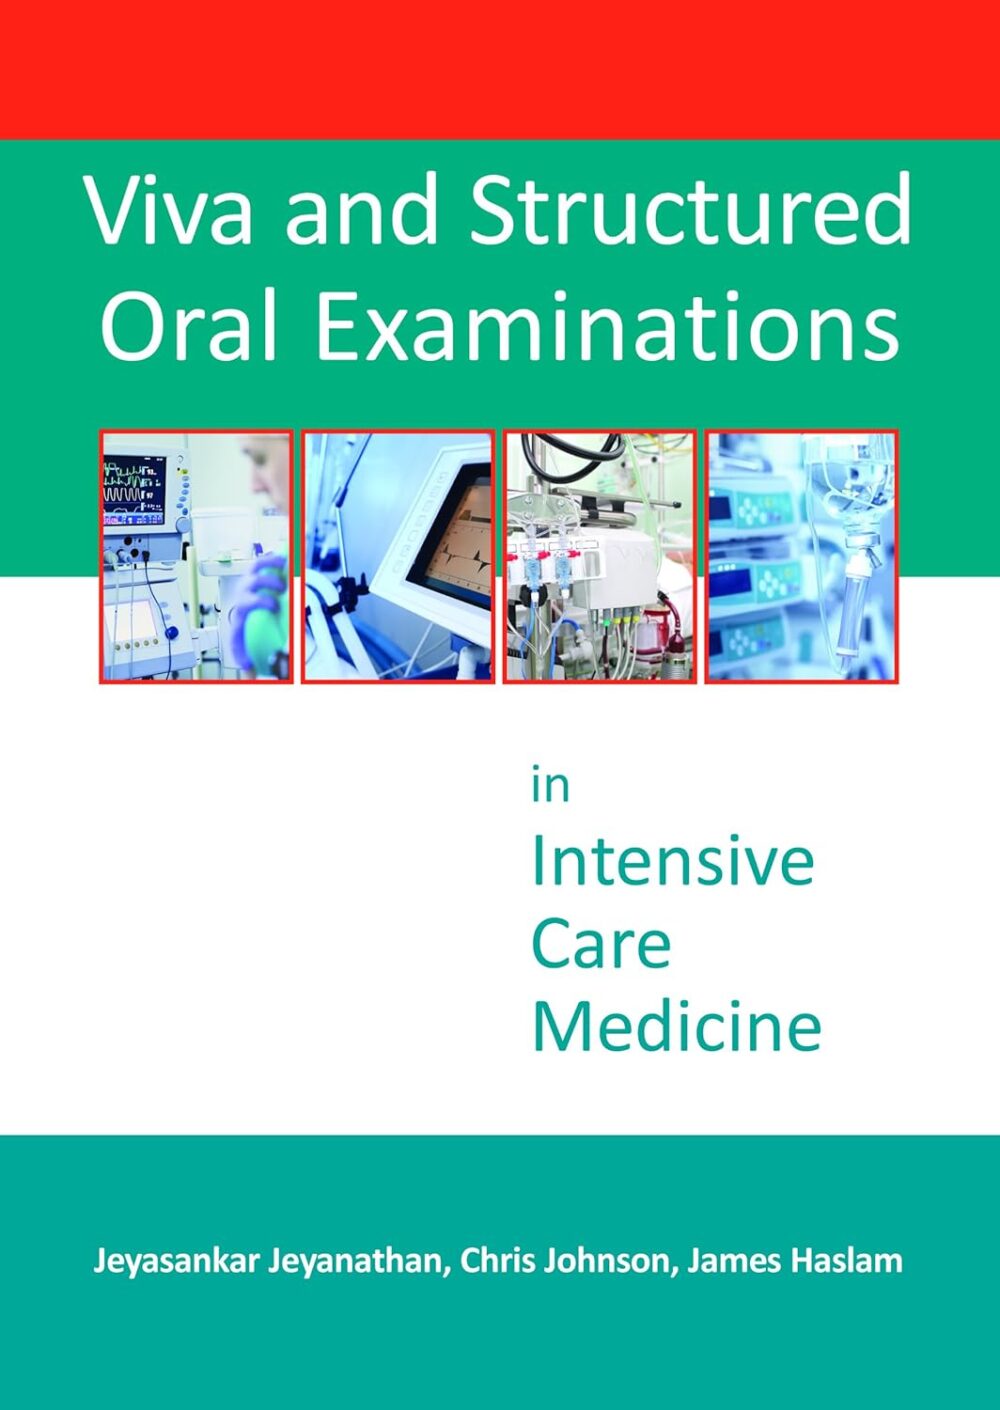 Viva and Structured Oral Examinations in Intensive Care Medicine 1st Edition